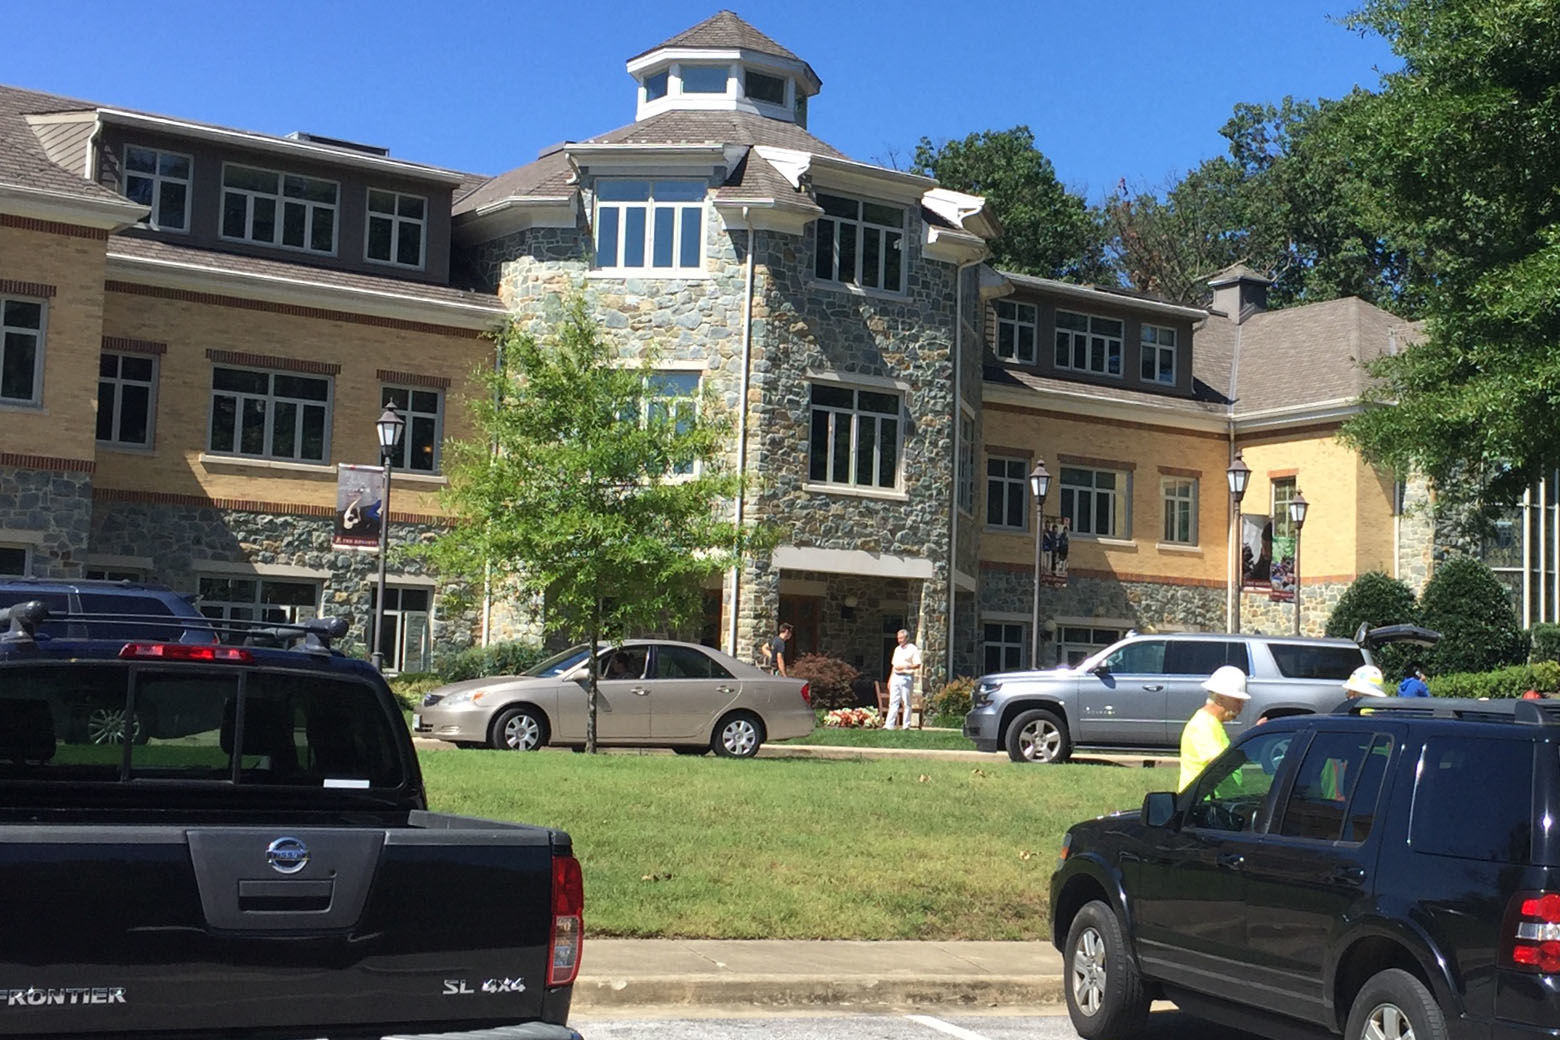 The Heights School in Potomac, Maryland, is seen in this Aug. 23, 2018 photo. Montgomery County police are investigating after a worker was killed in an construction accident. (WTOP/Kristi King)